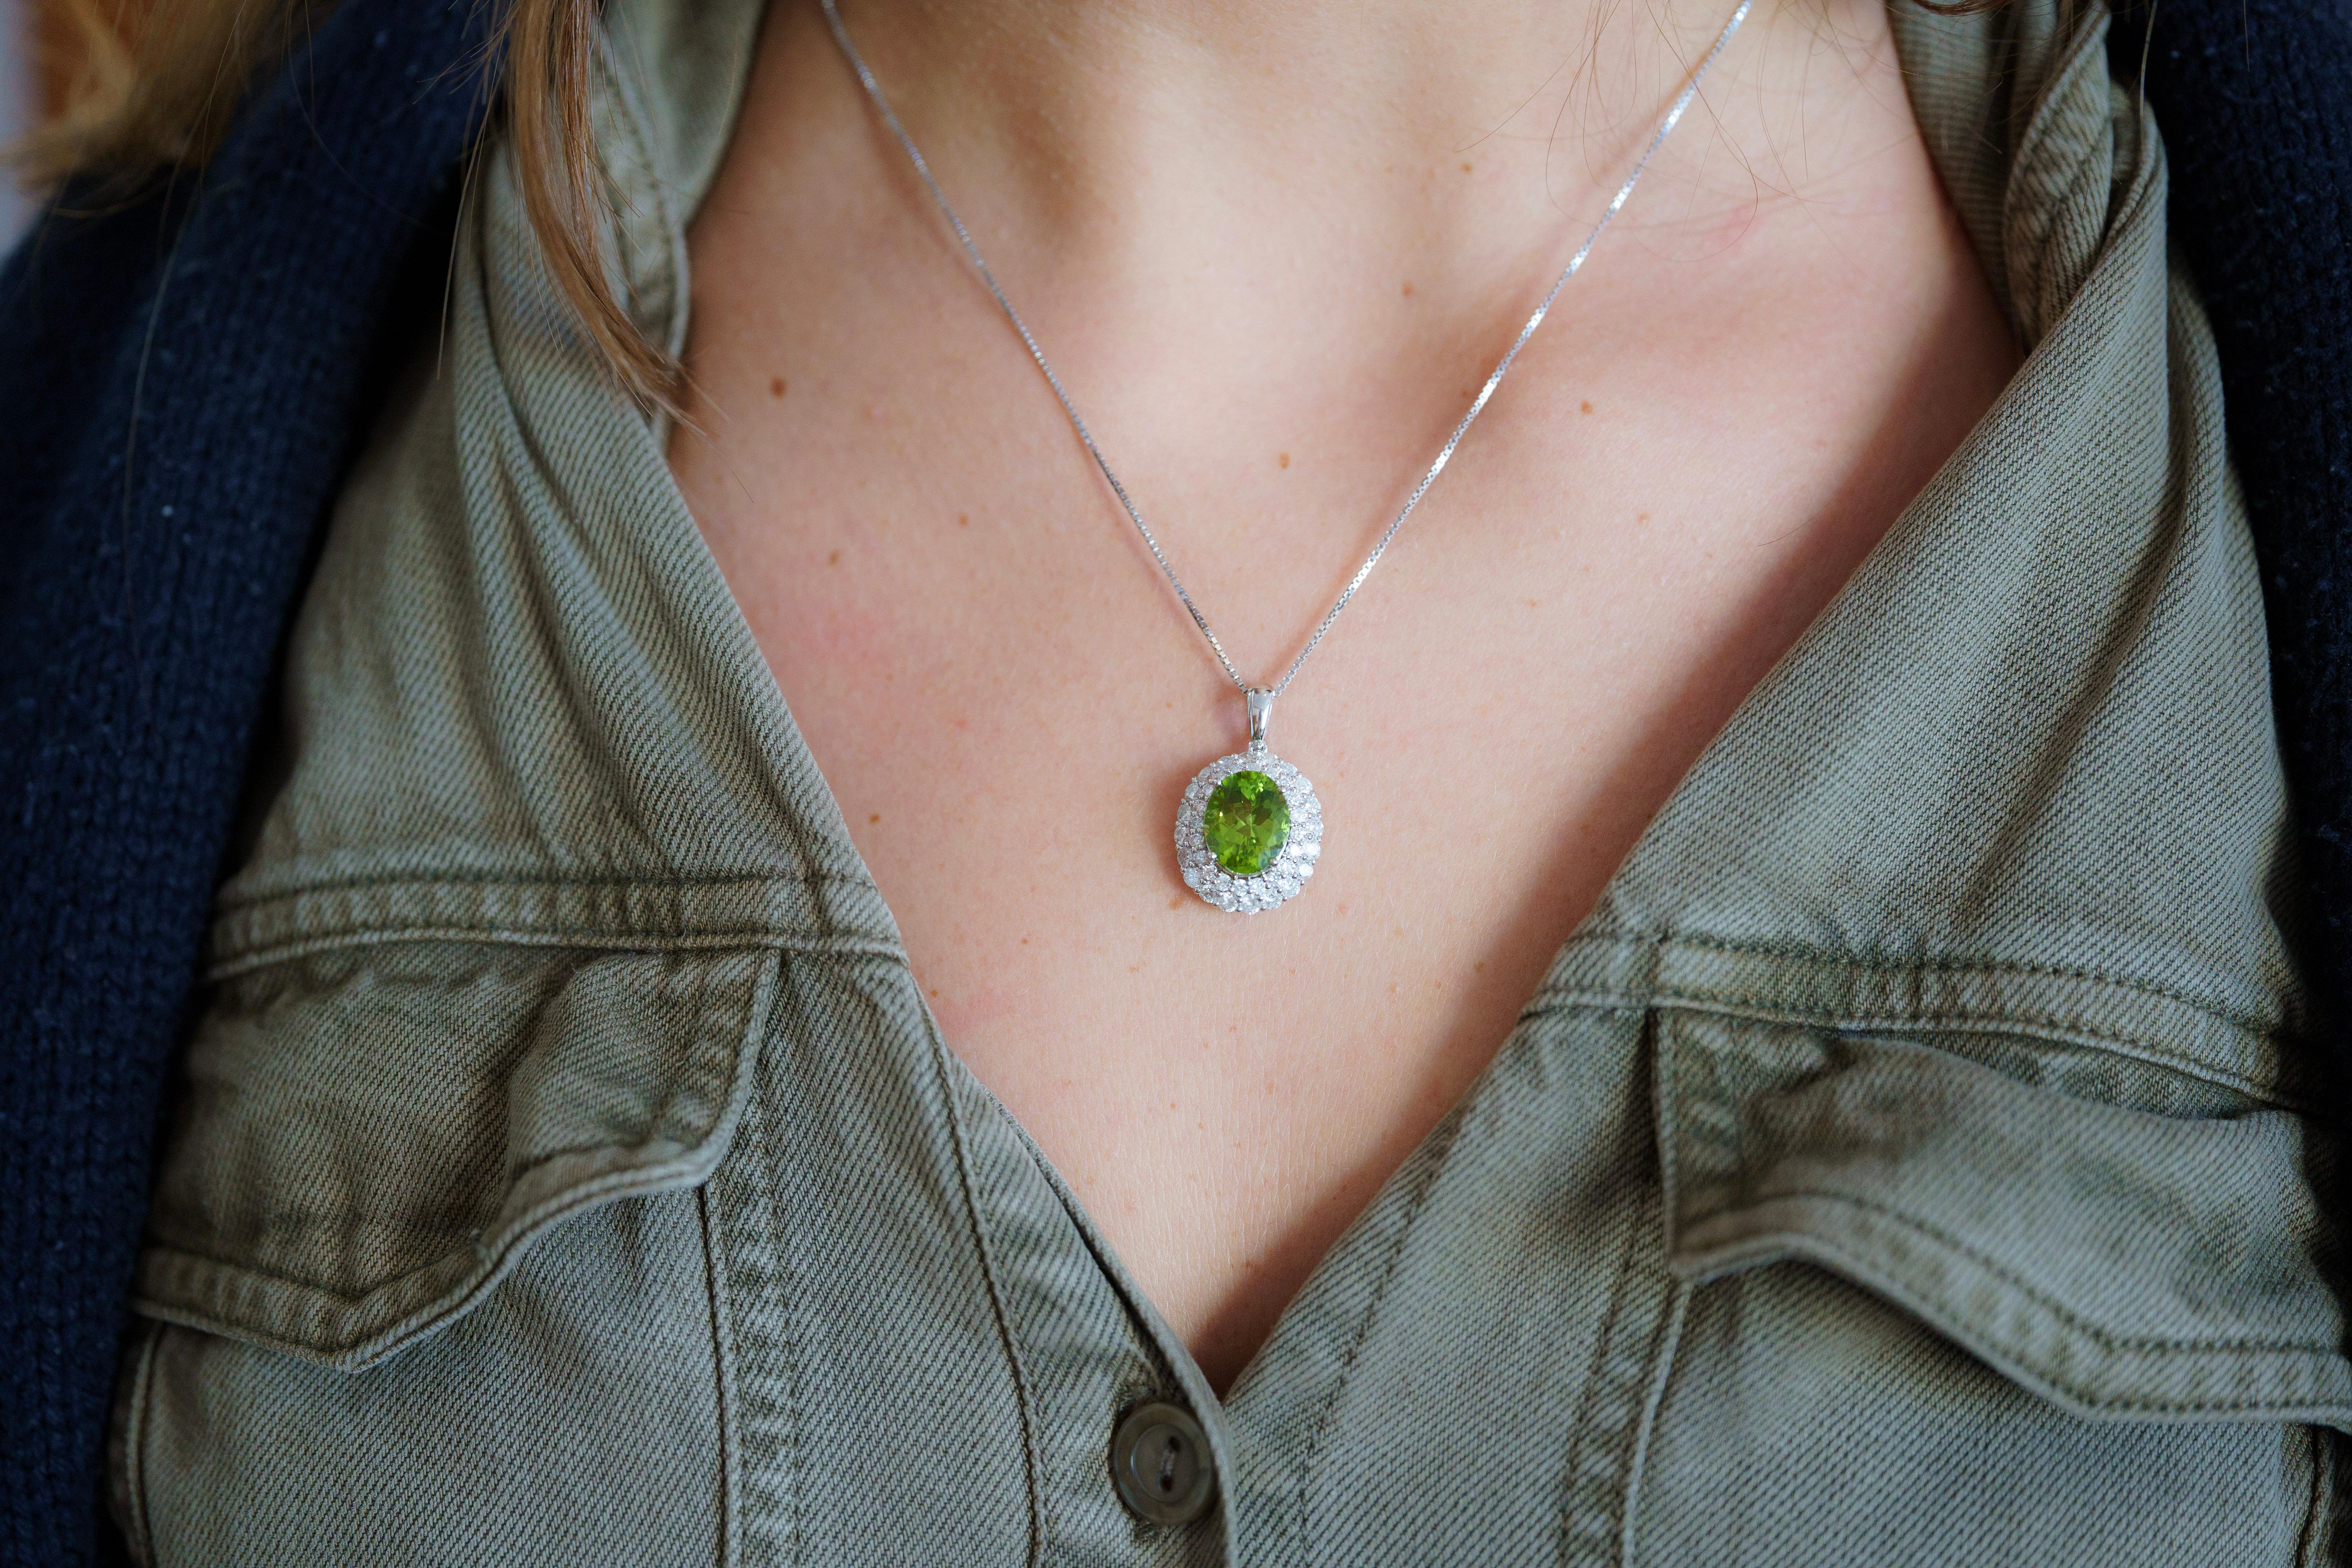 Presenting this extravagant Natural Green Peridot and Diamond Pendant, placed neatly in 18K White Gold.

This pendant features a vibrant oval-cut natural 5.03 carat peridot center in a prong setting, radiating a green hue. Paired with 1.74 carats